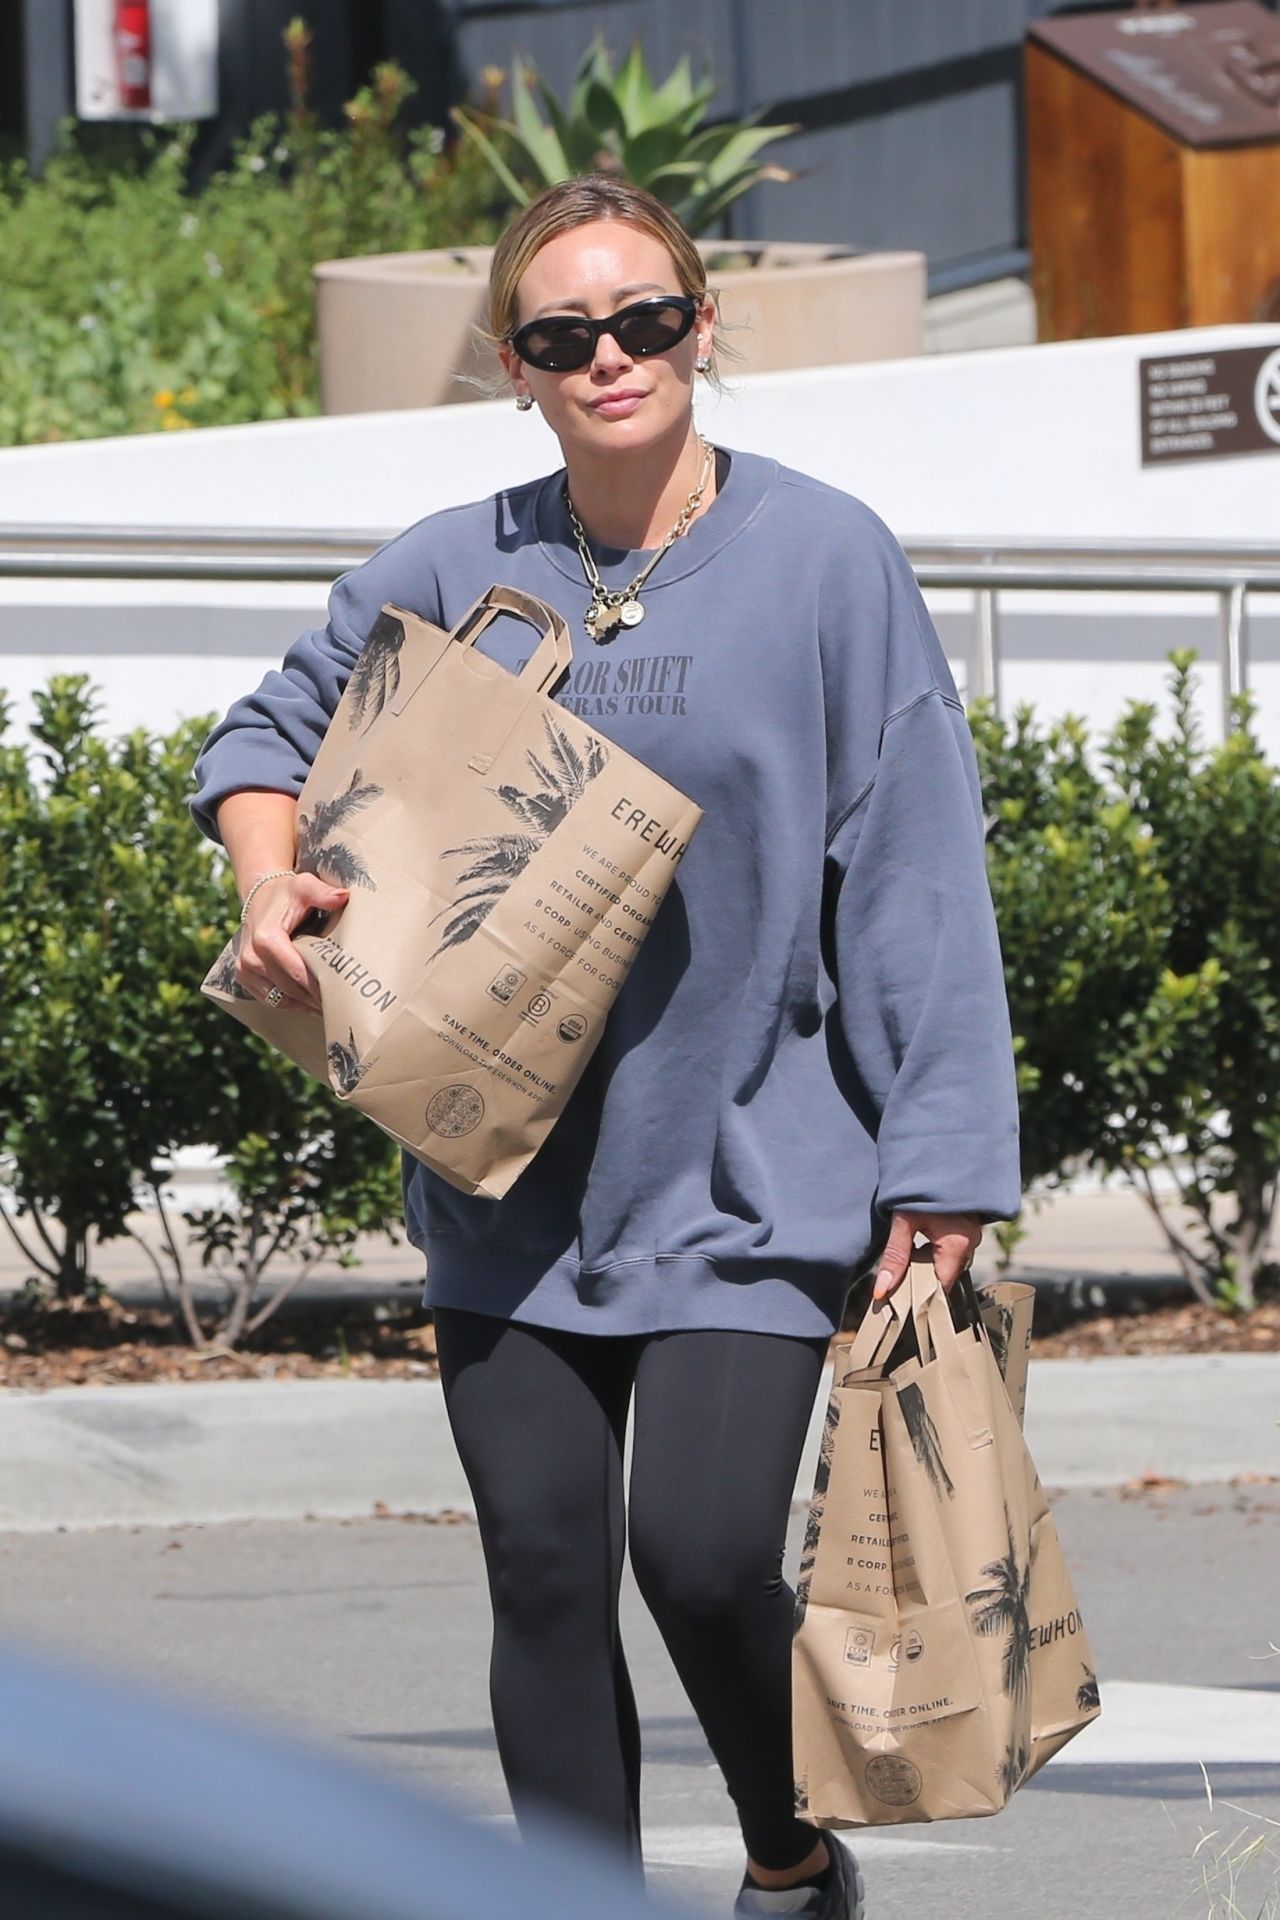 Alo yoga Muse Hoodie worn by Hilary Duff on Los Angeles February 7